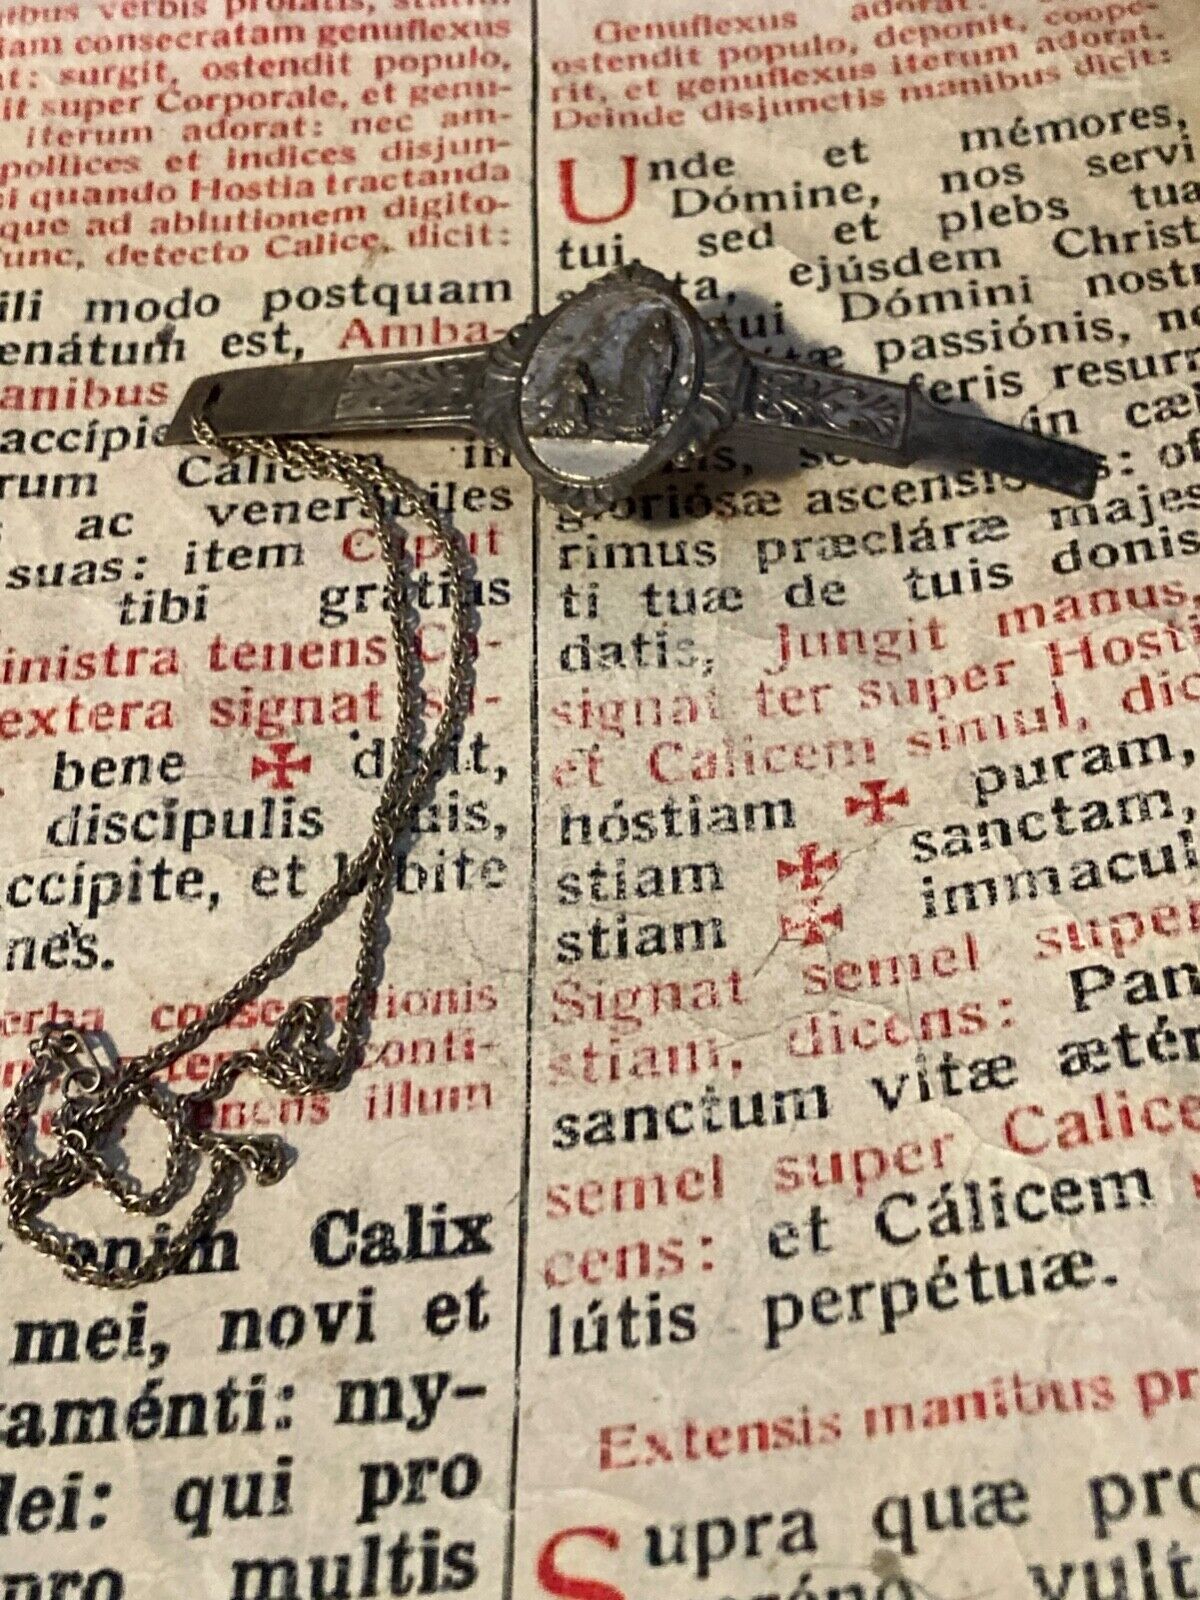 RARE NEW EX-VOTO BRACELET LOURDES: STUNNING P.G.R. for grace received with chain